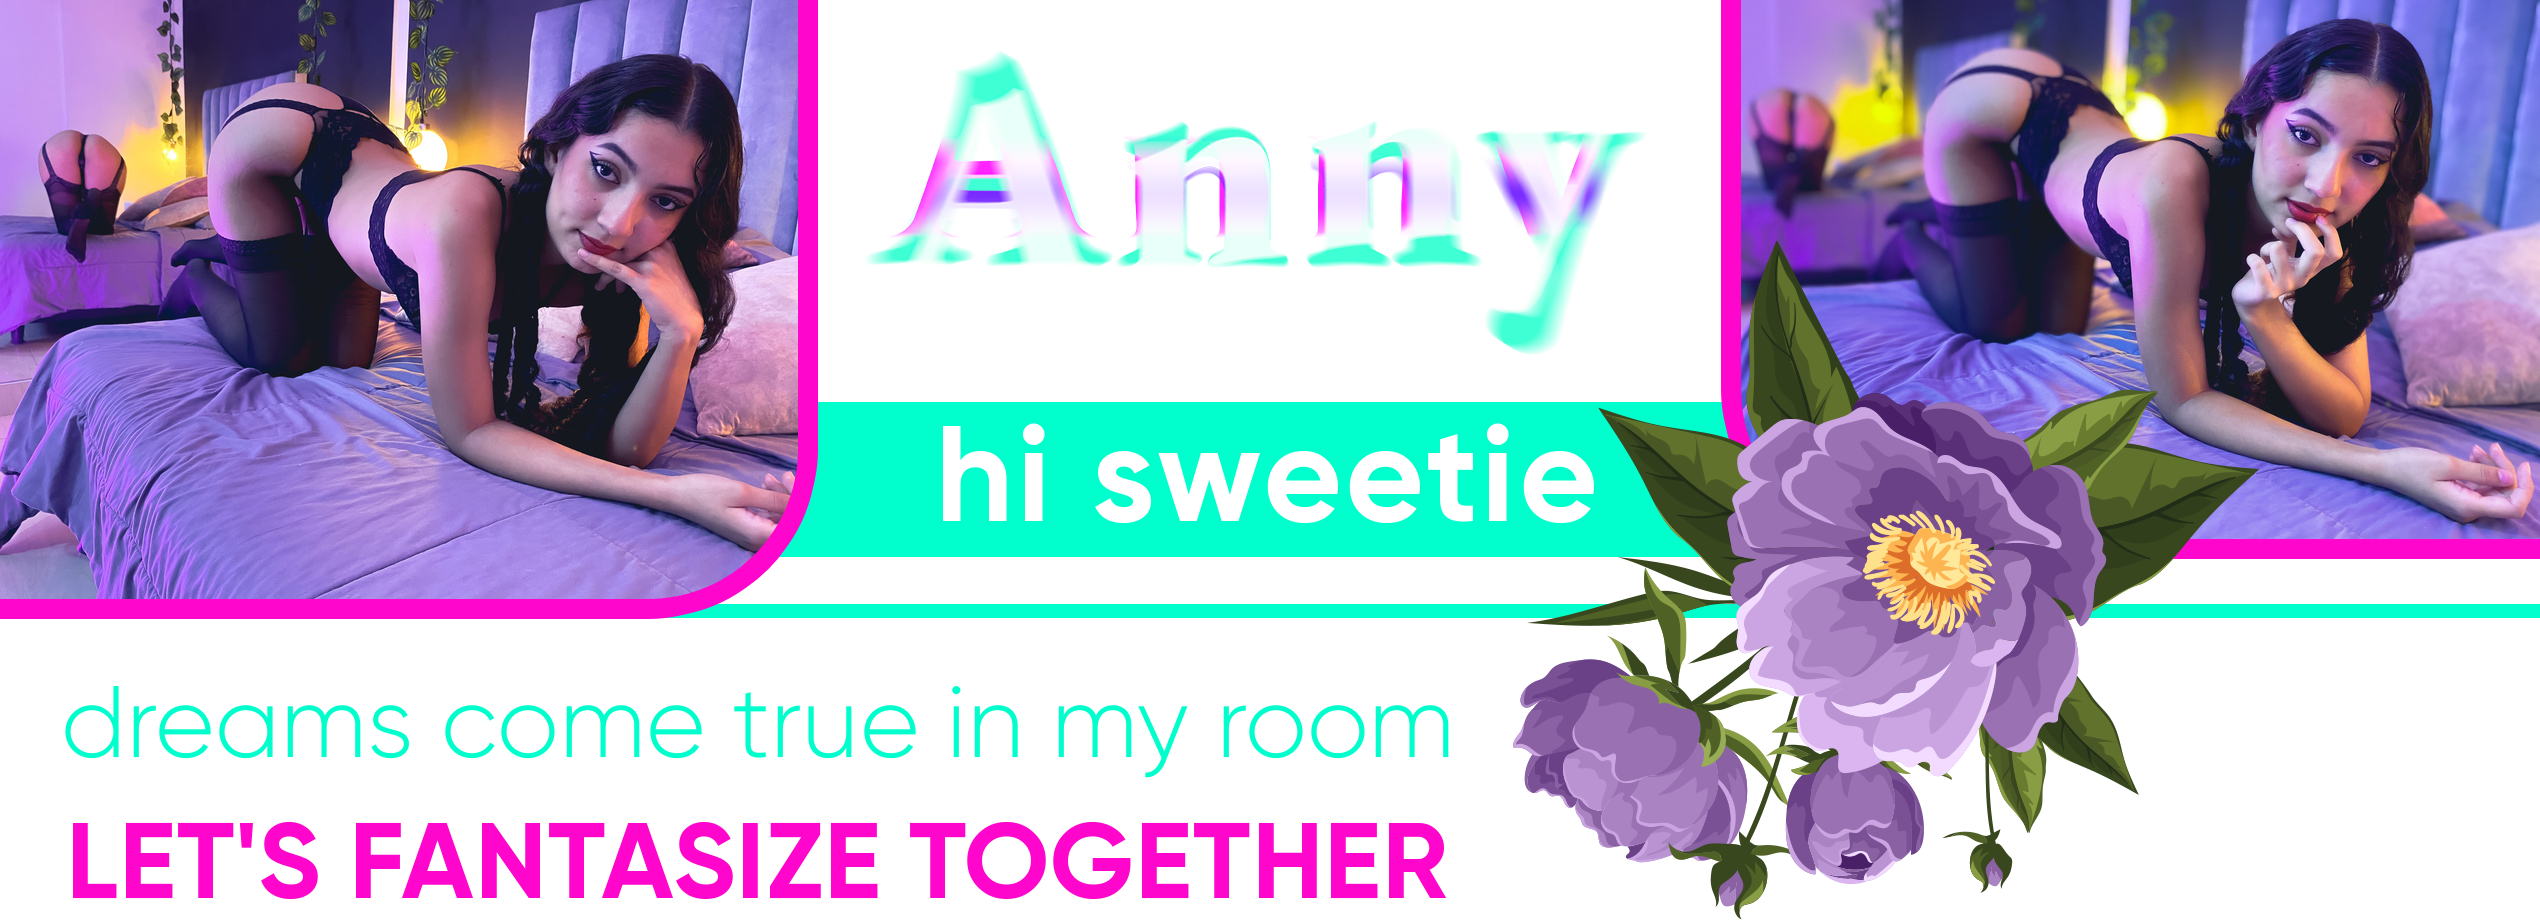 Anny-Baker Hi! Welcome to my room! Love me! image: 1